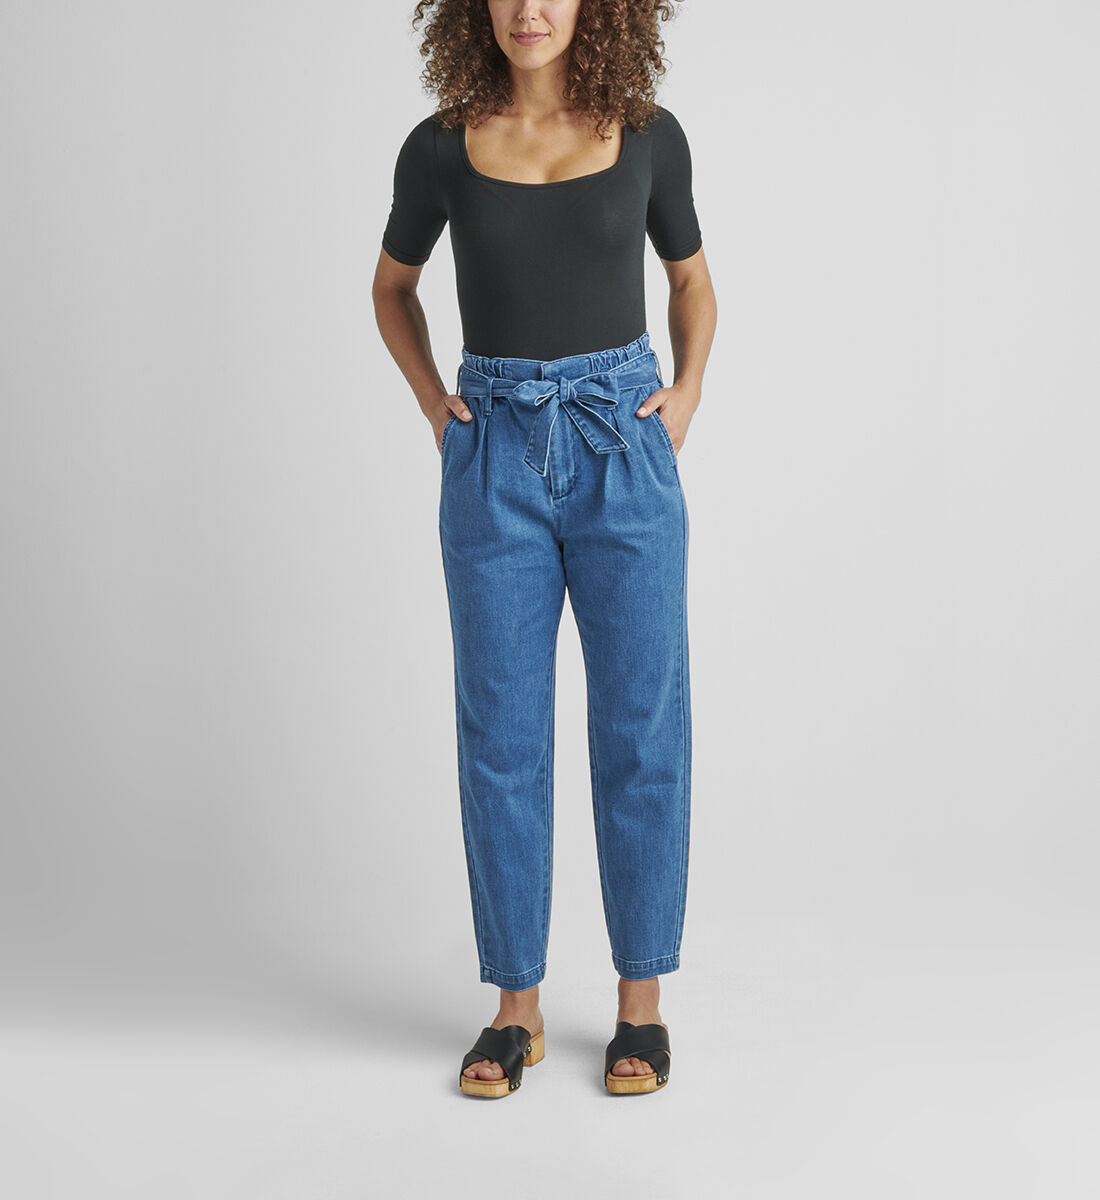 Belted Pleat High Rise Tapered Leg Pant Front